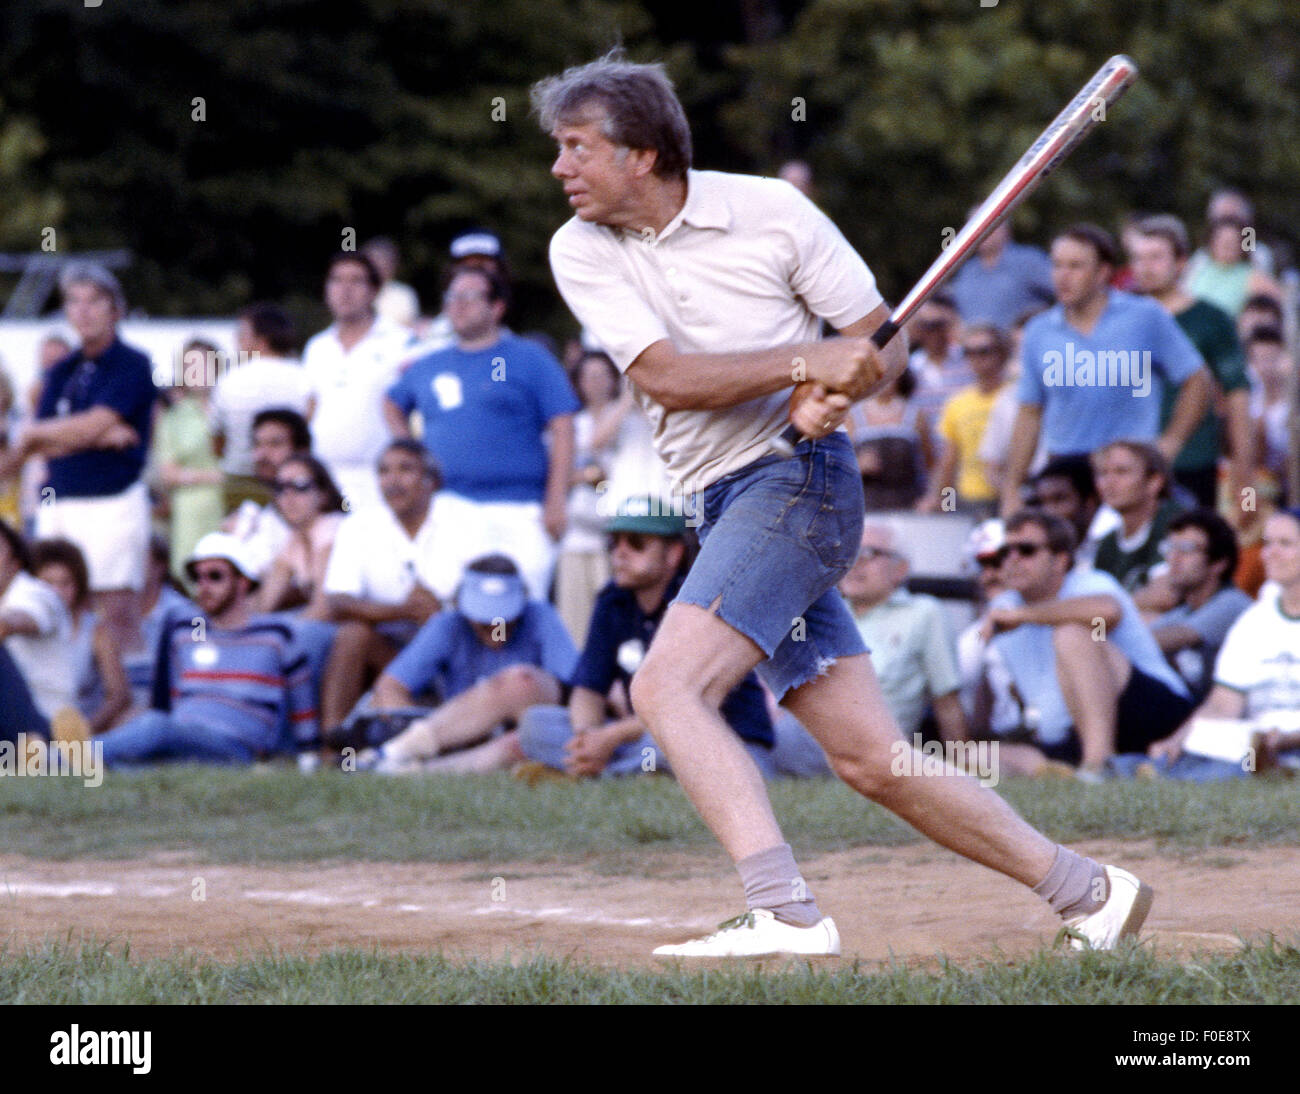 Jan. 2, 1977 - USA - Jimmy Carter plays softball in his hometown of Plains, Georgia. Carter was pitcher and captain of his team that was comprised of off duty U.S. Secret service agents and White House staffers. The opposing team was comprised of members of the White house traveling press and captained by Billy Carter, the president's brother. (Credit Image: © Ken Hawkins via ZUMA Wire) Stock Photo